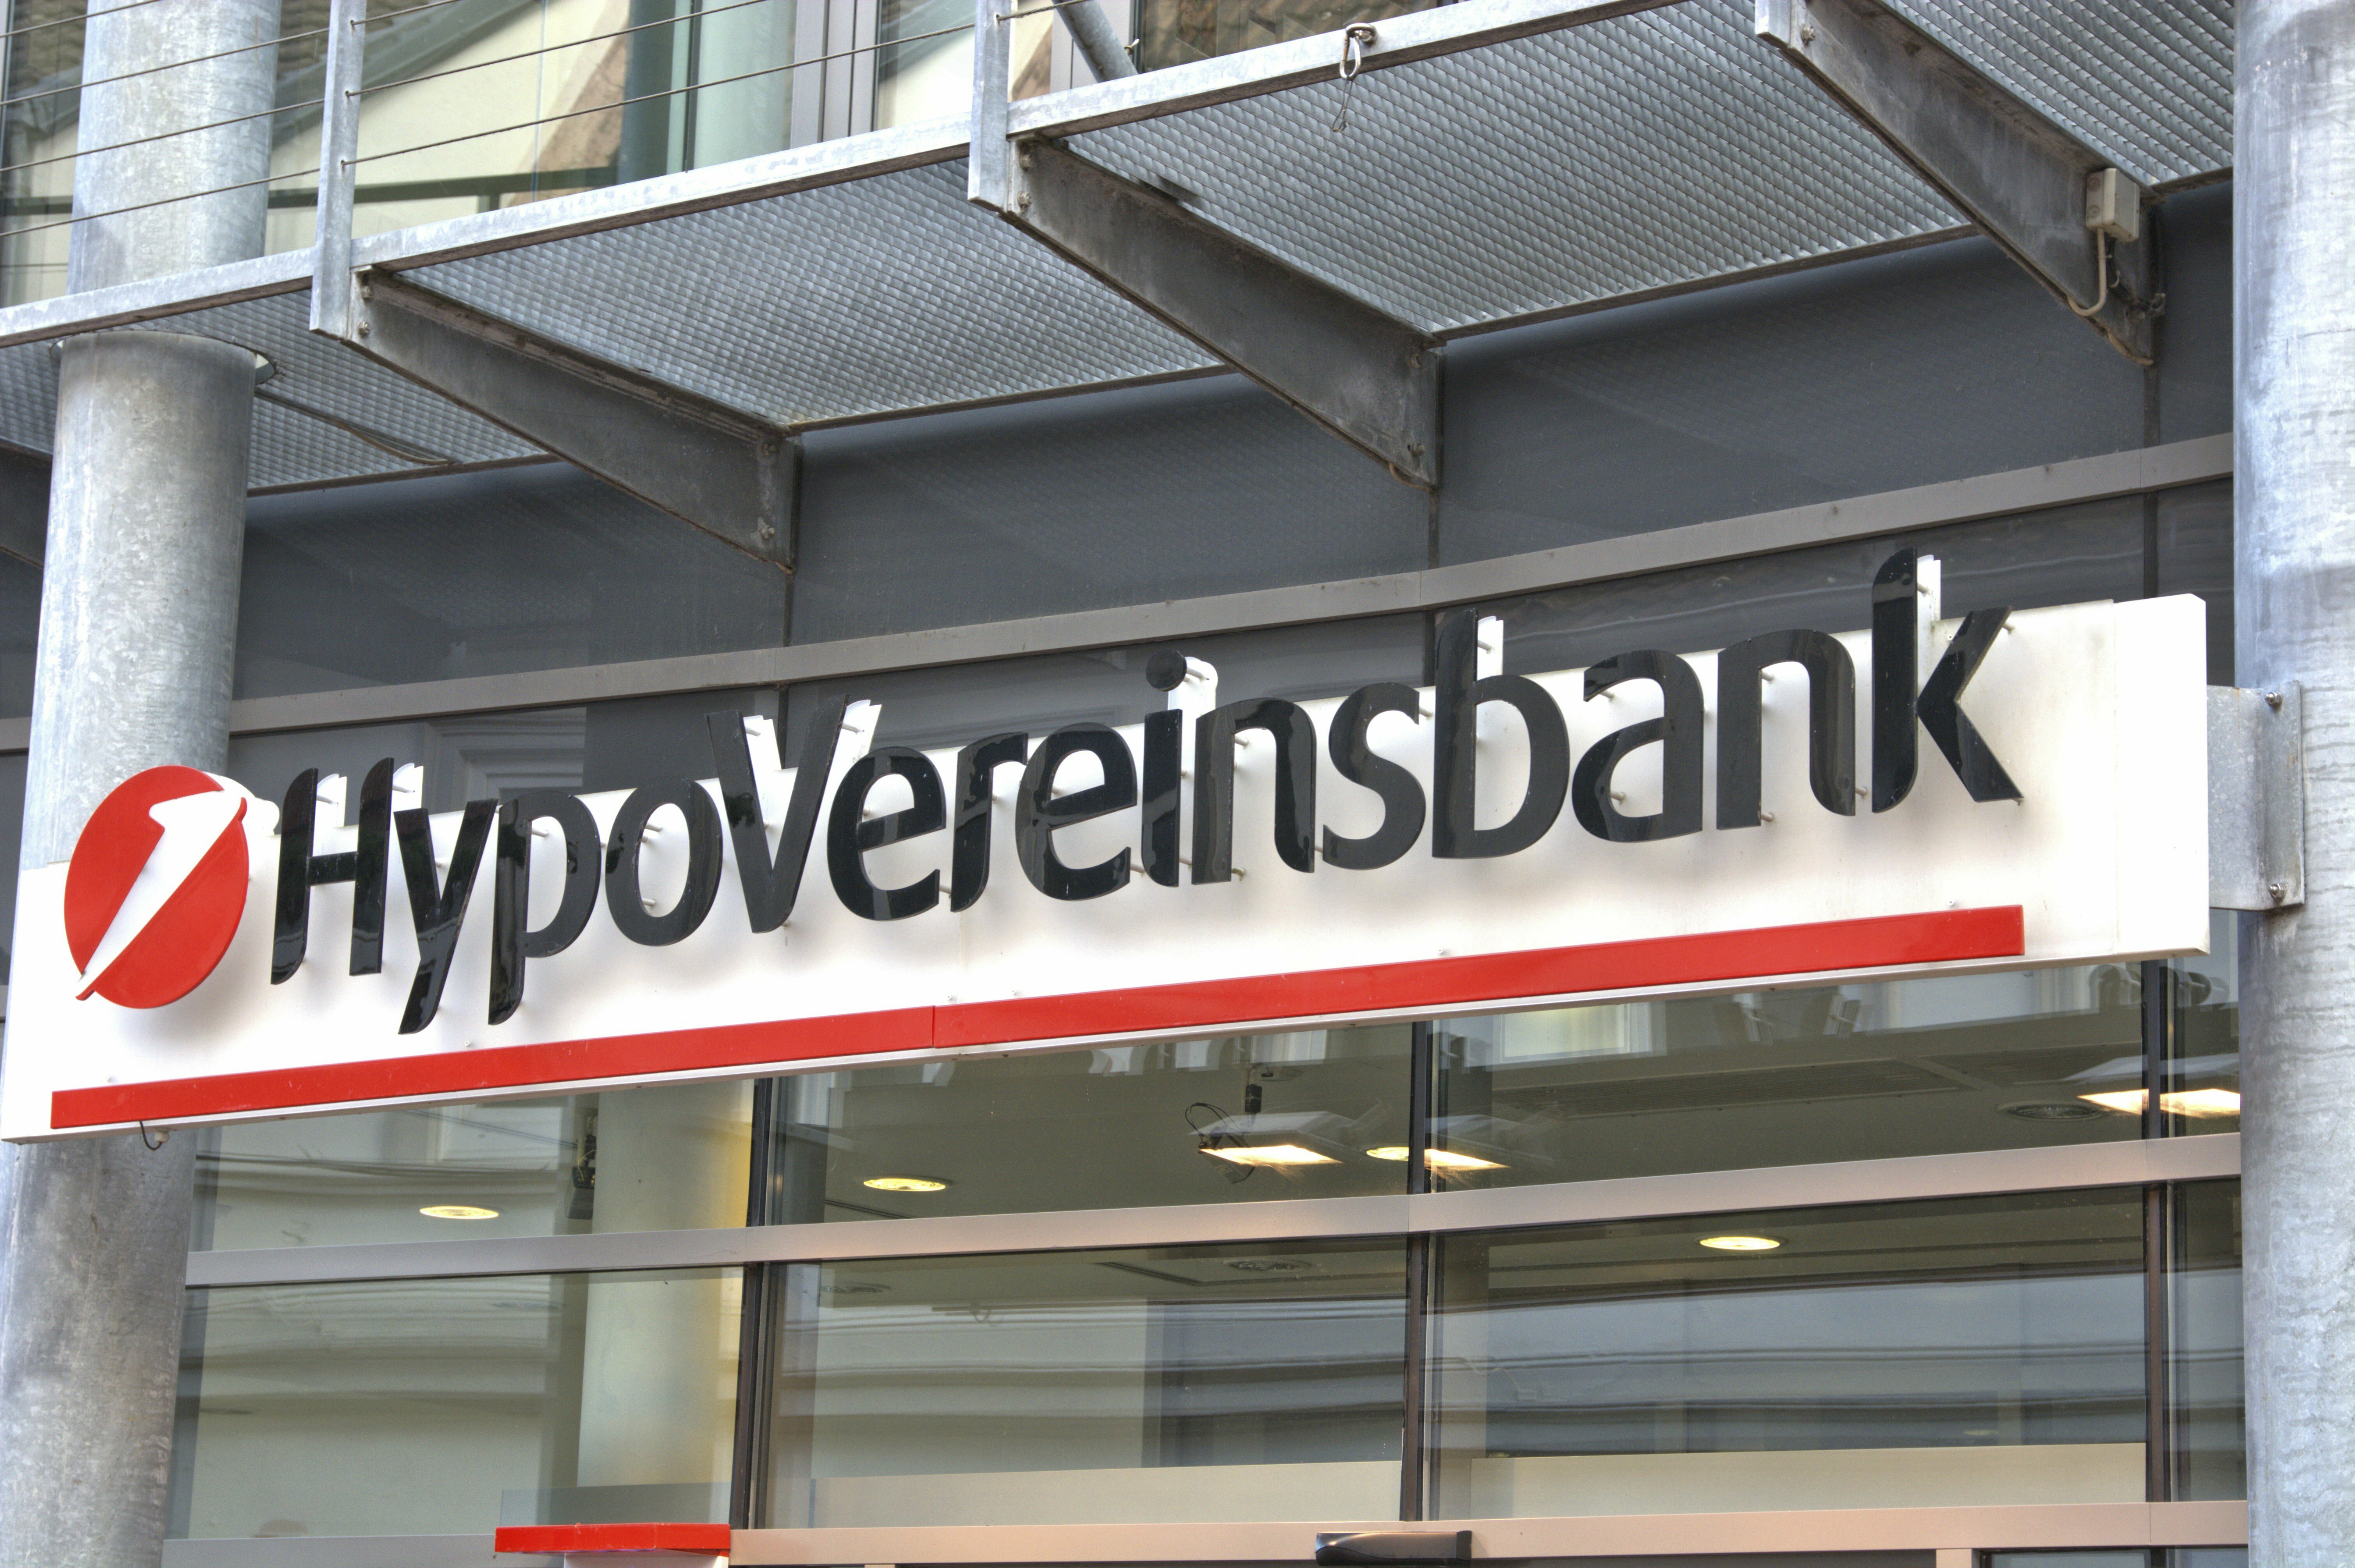 The illuminated sign of a HypoVereinbank branch in Schleswig. HypoVereinsbank is the brand of Unicredit Bank AG with headquarters in Munich. --- For editorial use only --- Only for editorial use! | usage worldwide Photo by: Torsten Sukrow/SULUPRESS.DE/picture-alliance/dpa/AP Images